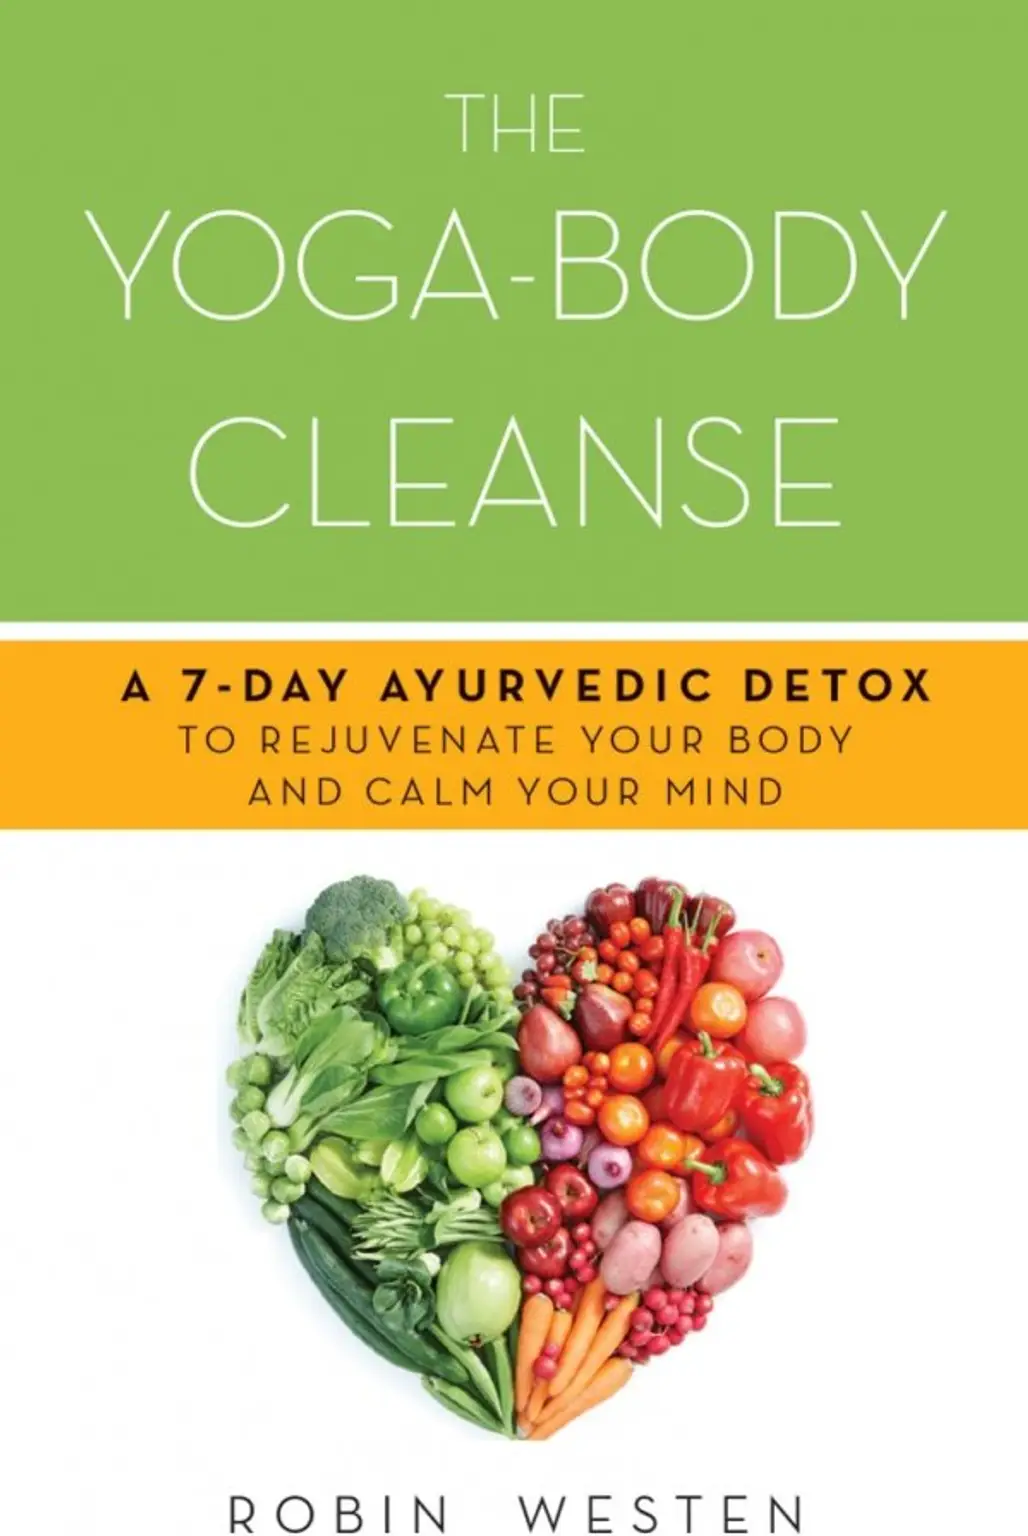 The Yoga Body Cleanse by Robin Westen